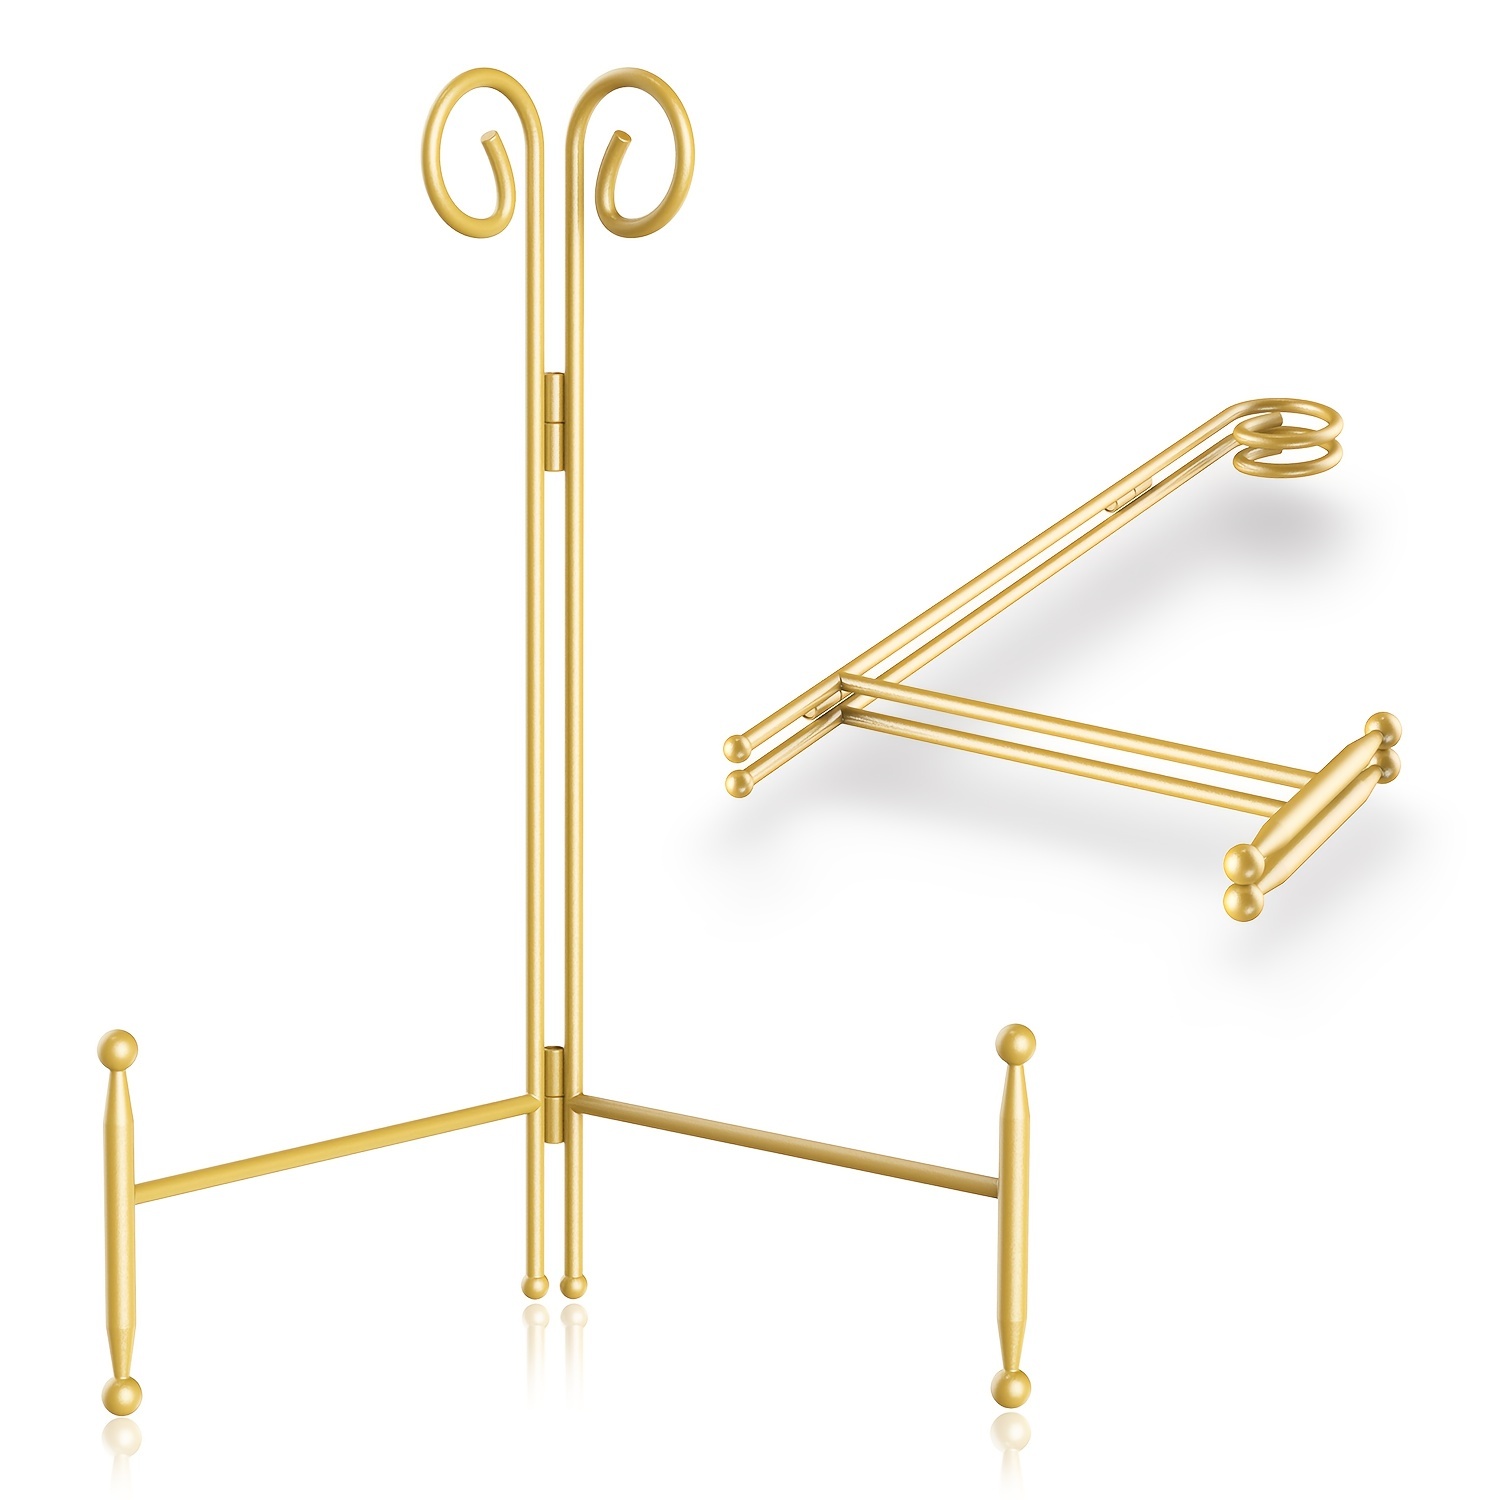 UoYeet Plate Stand 12 Inch Gold Display Plate Holder, Collapsible Iron  Plate Stands for Display, Folding Display Easel for Photo, Pictures,  Decorative